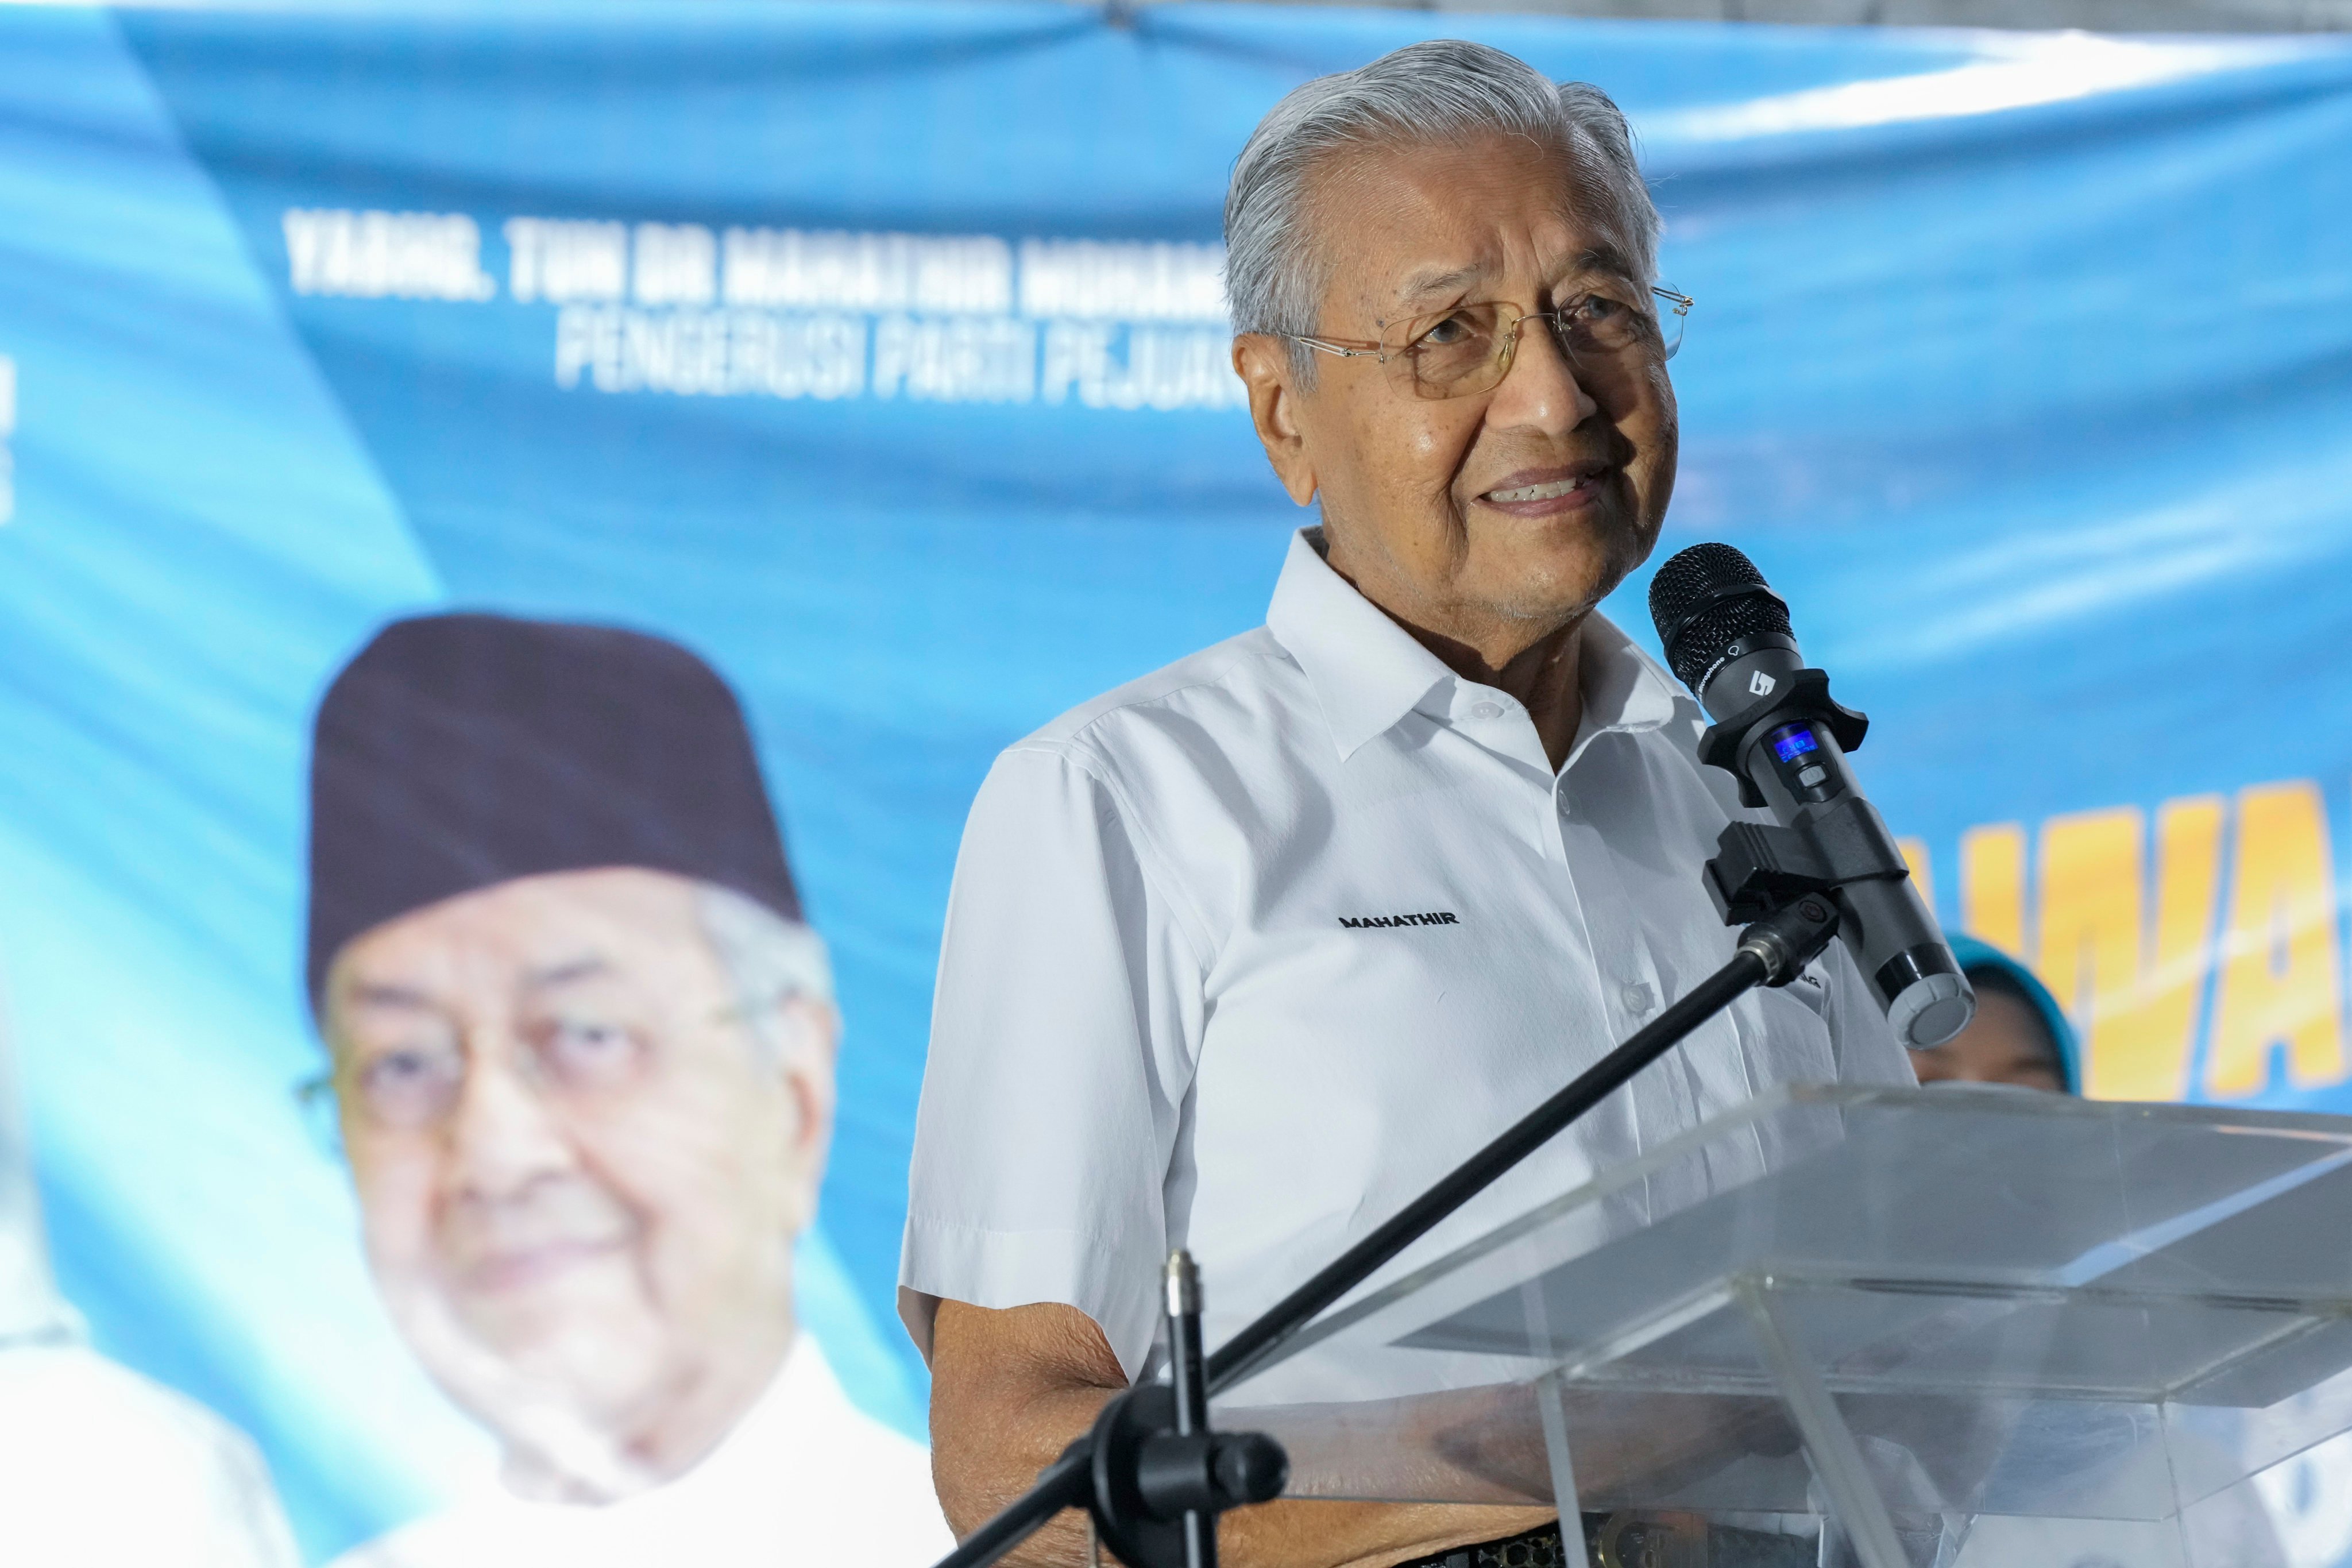 Two-time former Malaysian Prime Minister Mahathir Mohamad speaking at a rally in Kuala Lumpur on November 15, 2022. Photo: AP